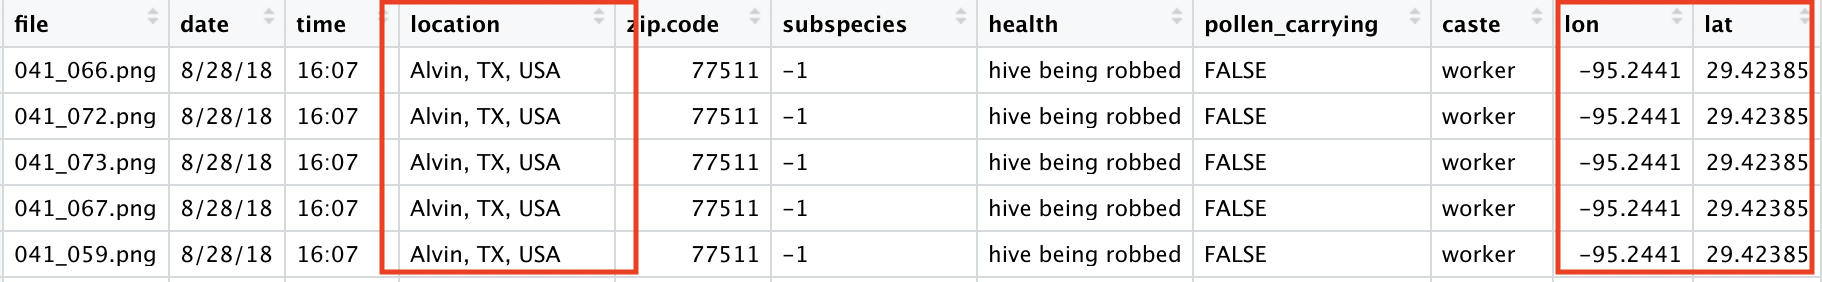 example rows of the bee dataset